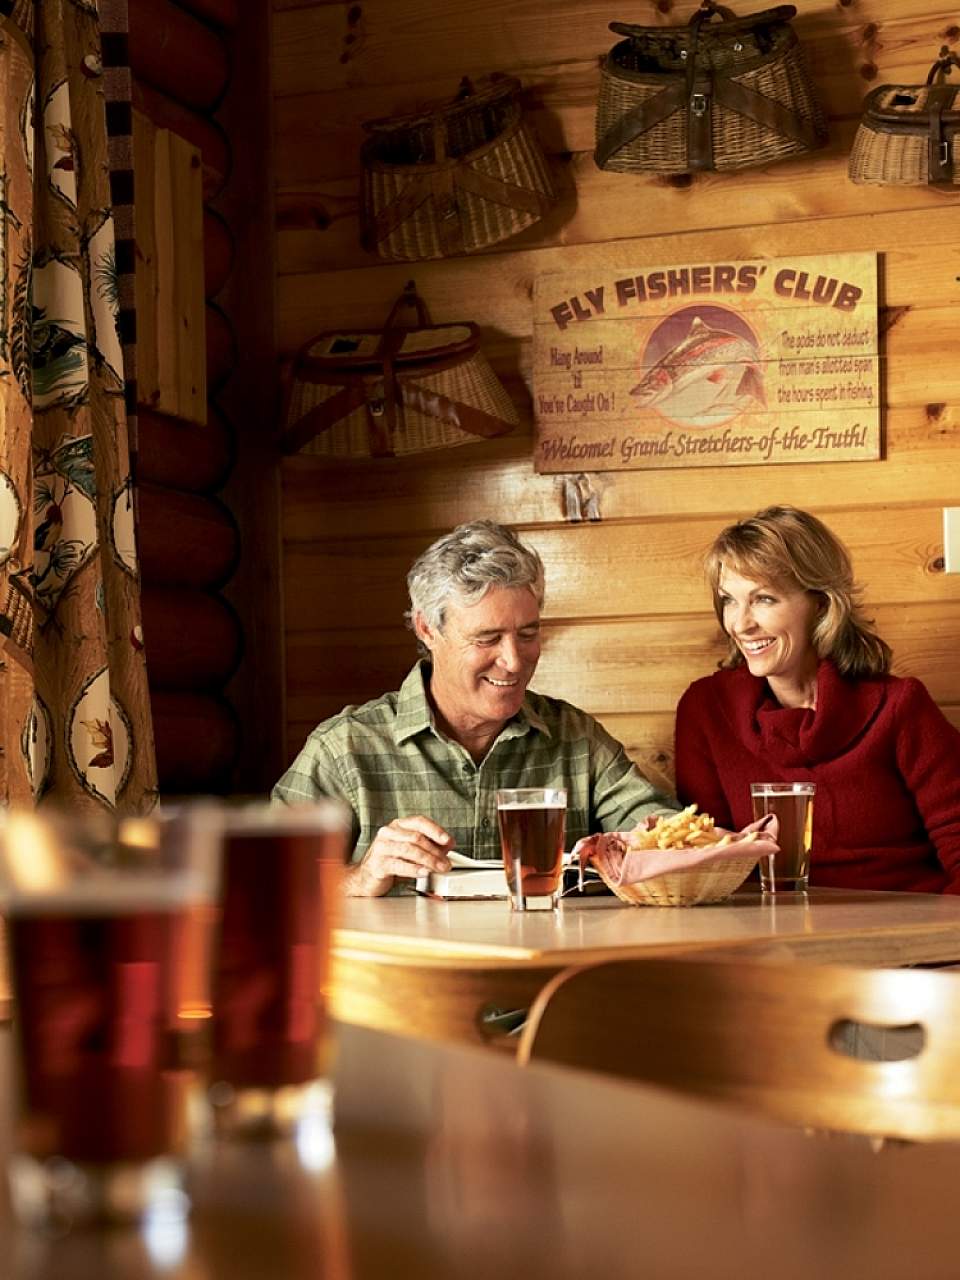 Rafter's Lounge is a laid-back bar with a deck overlooking the Kenai River that serves delicious drinks.